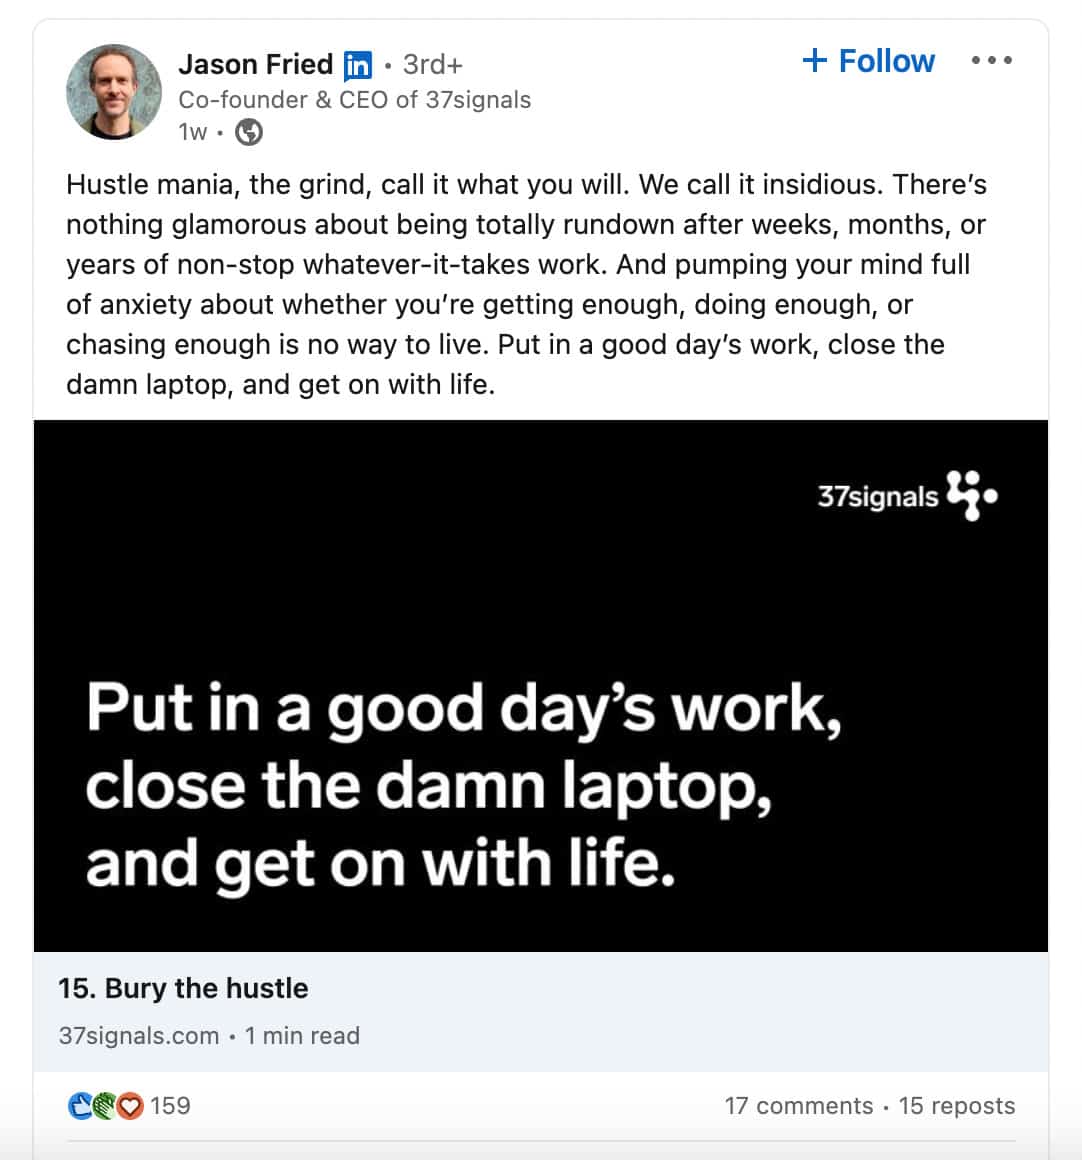 CEO Jason Fried frequently expresses his views on people management, standing up for his employees, while motivating them to deliver. 